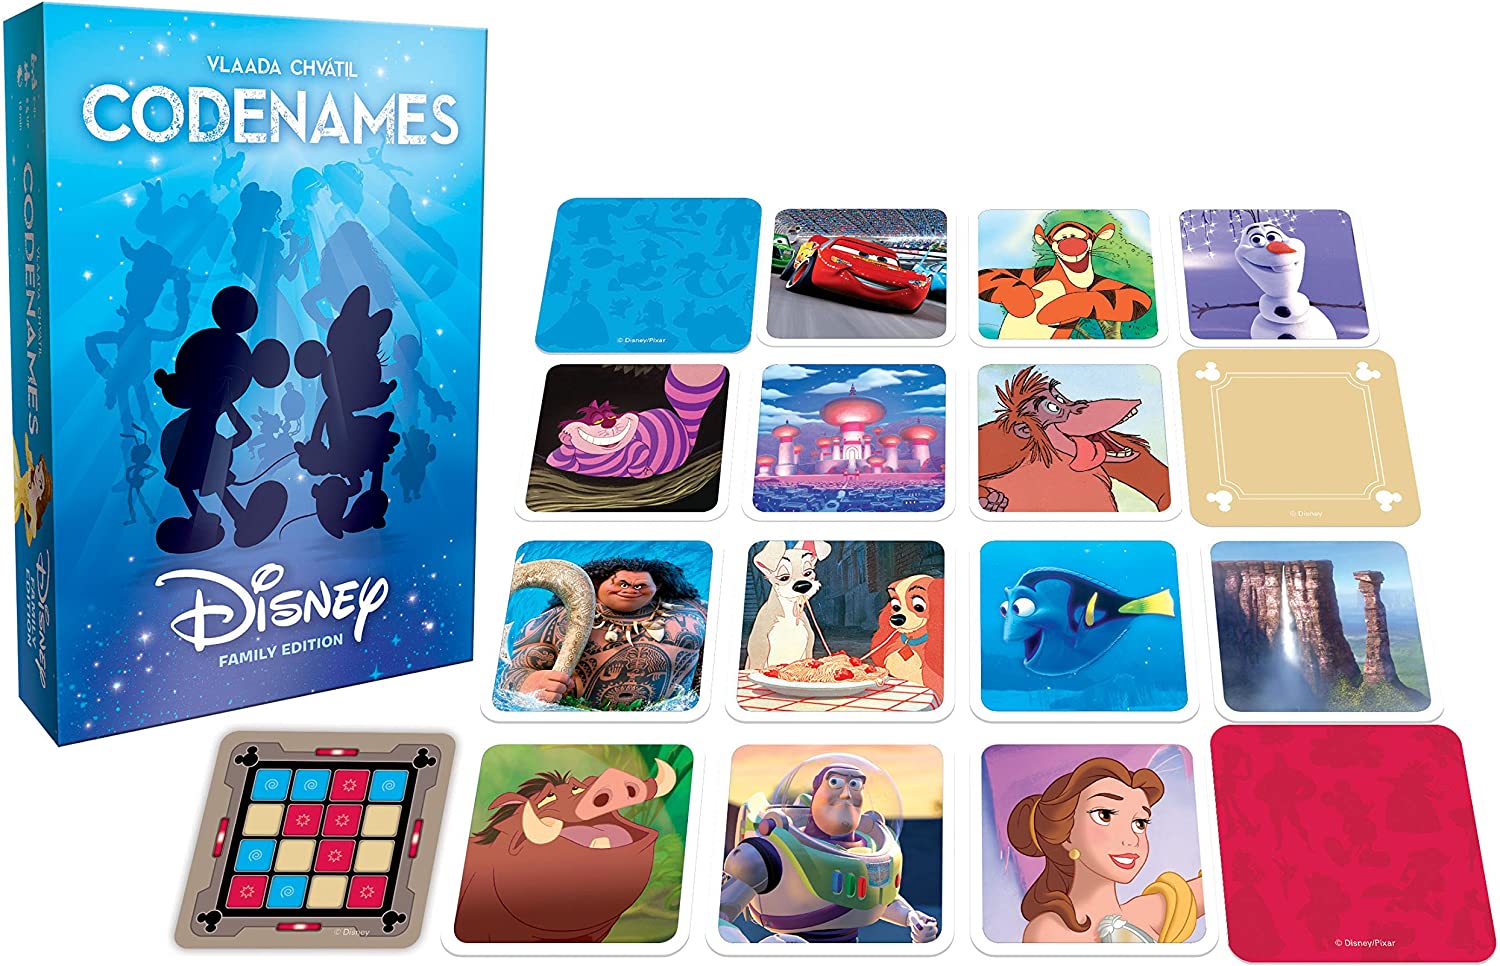 Codenames Disney Family Edition | Best Family Board Game, Great Game for All Ages | Featuring Disney Characters, Disney Artwork | Board Game for 2 Players or More | Perfect for Disney Fans